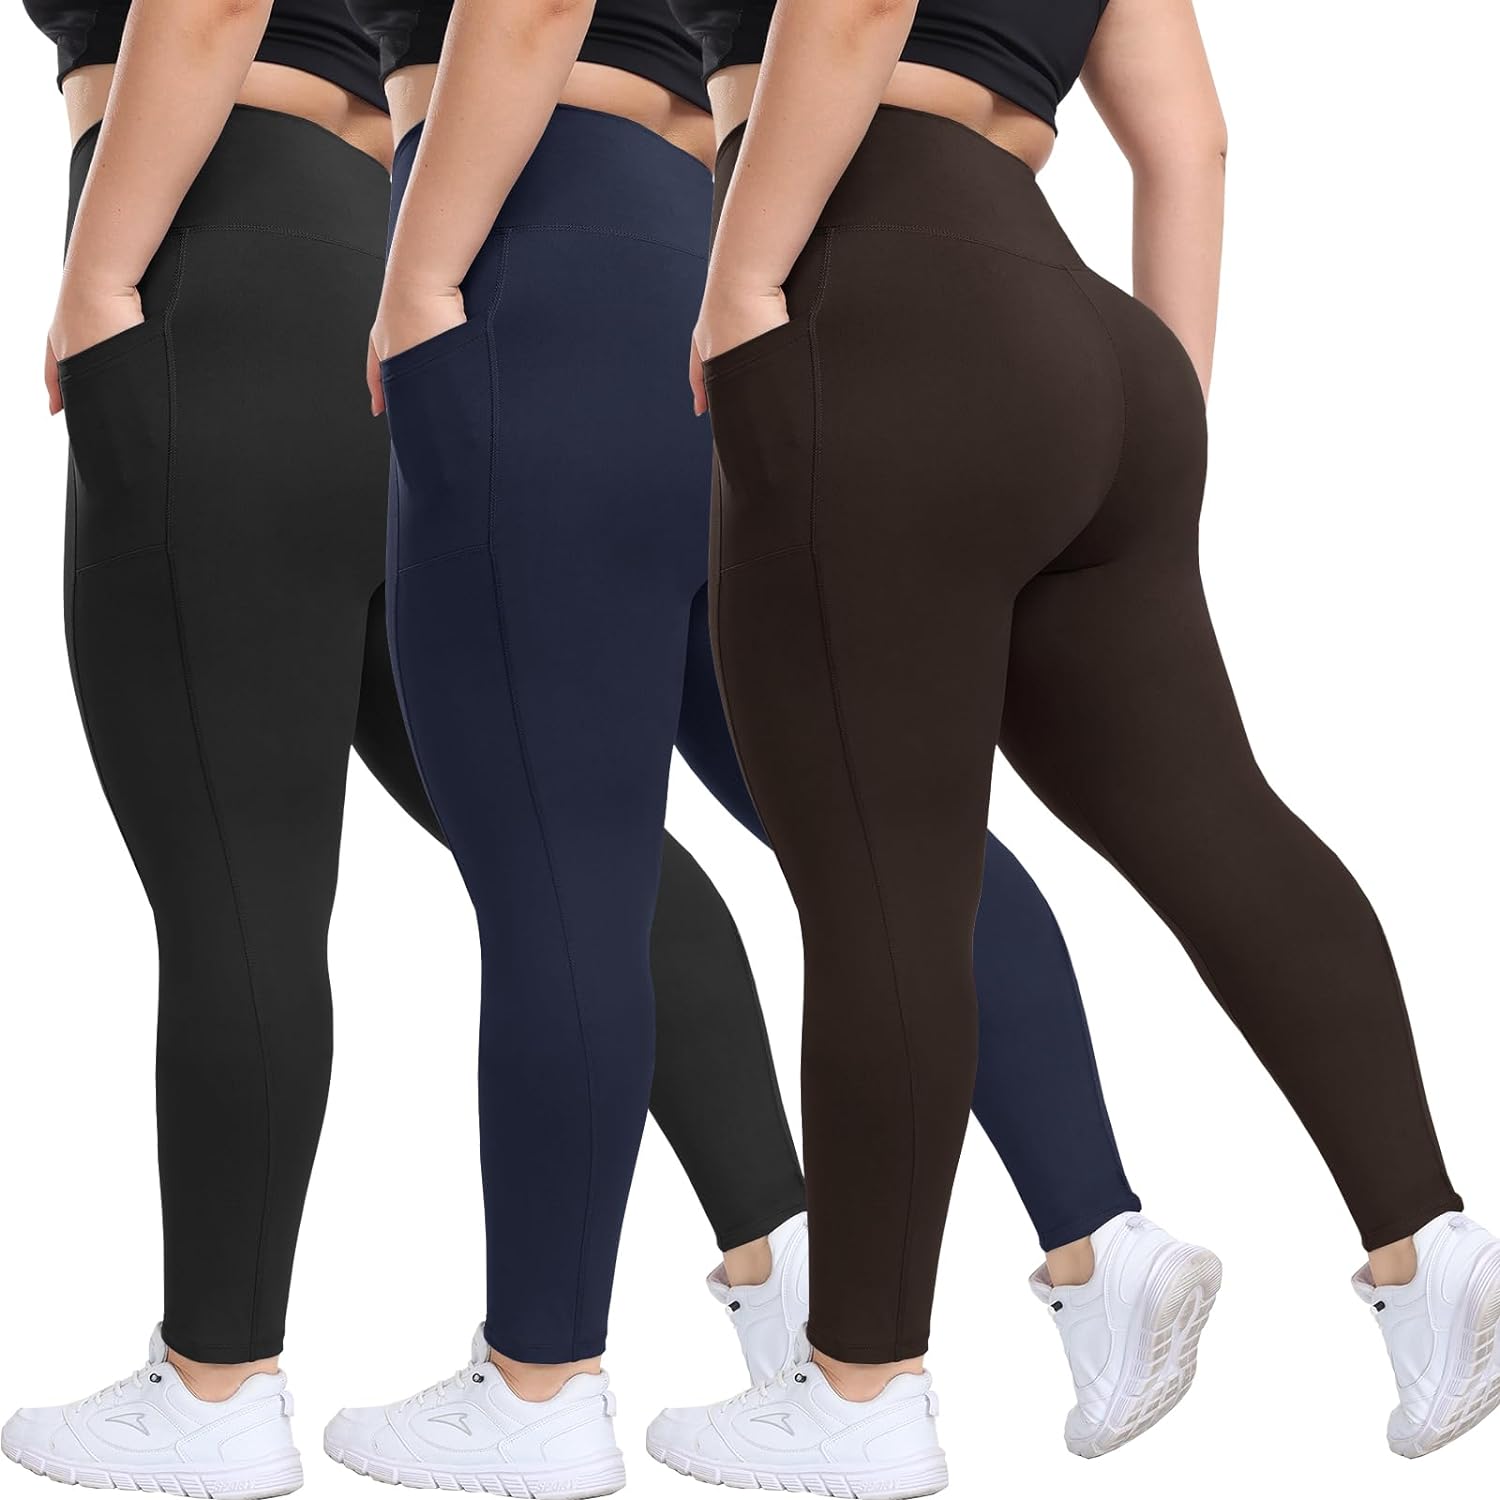 HLTPRO 3 Pack Plus Size Leggings with Pockets for Women - Black High Waisted Tummy Control Soft Yoga Pants for Gym Workout